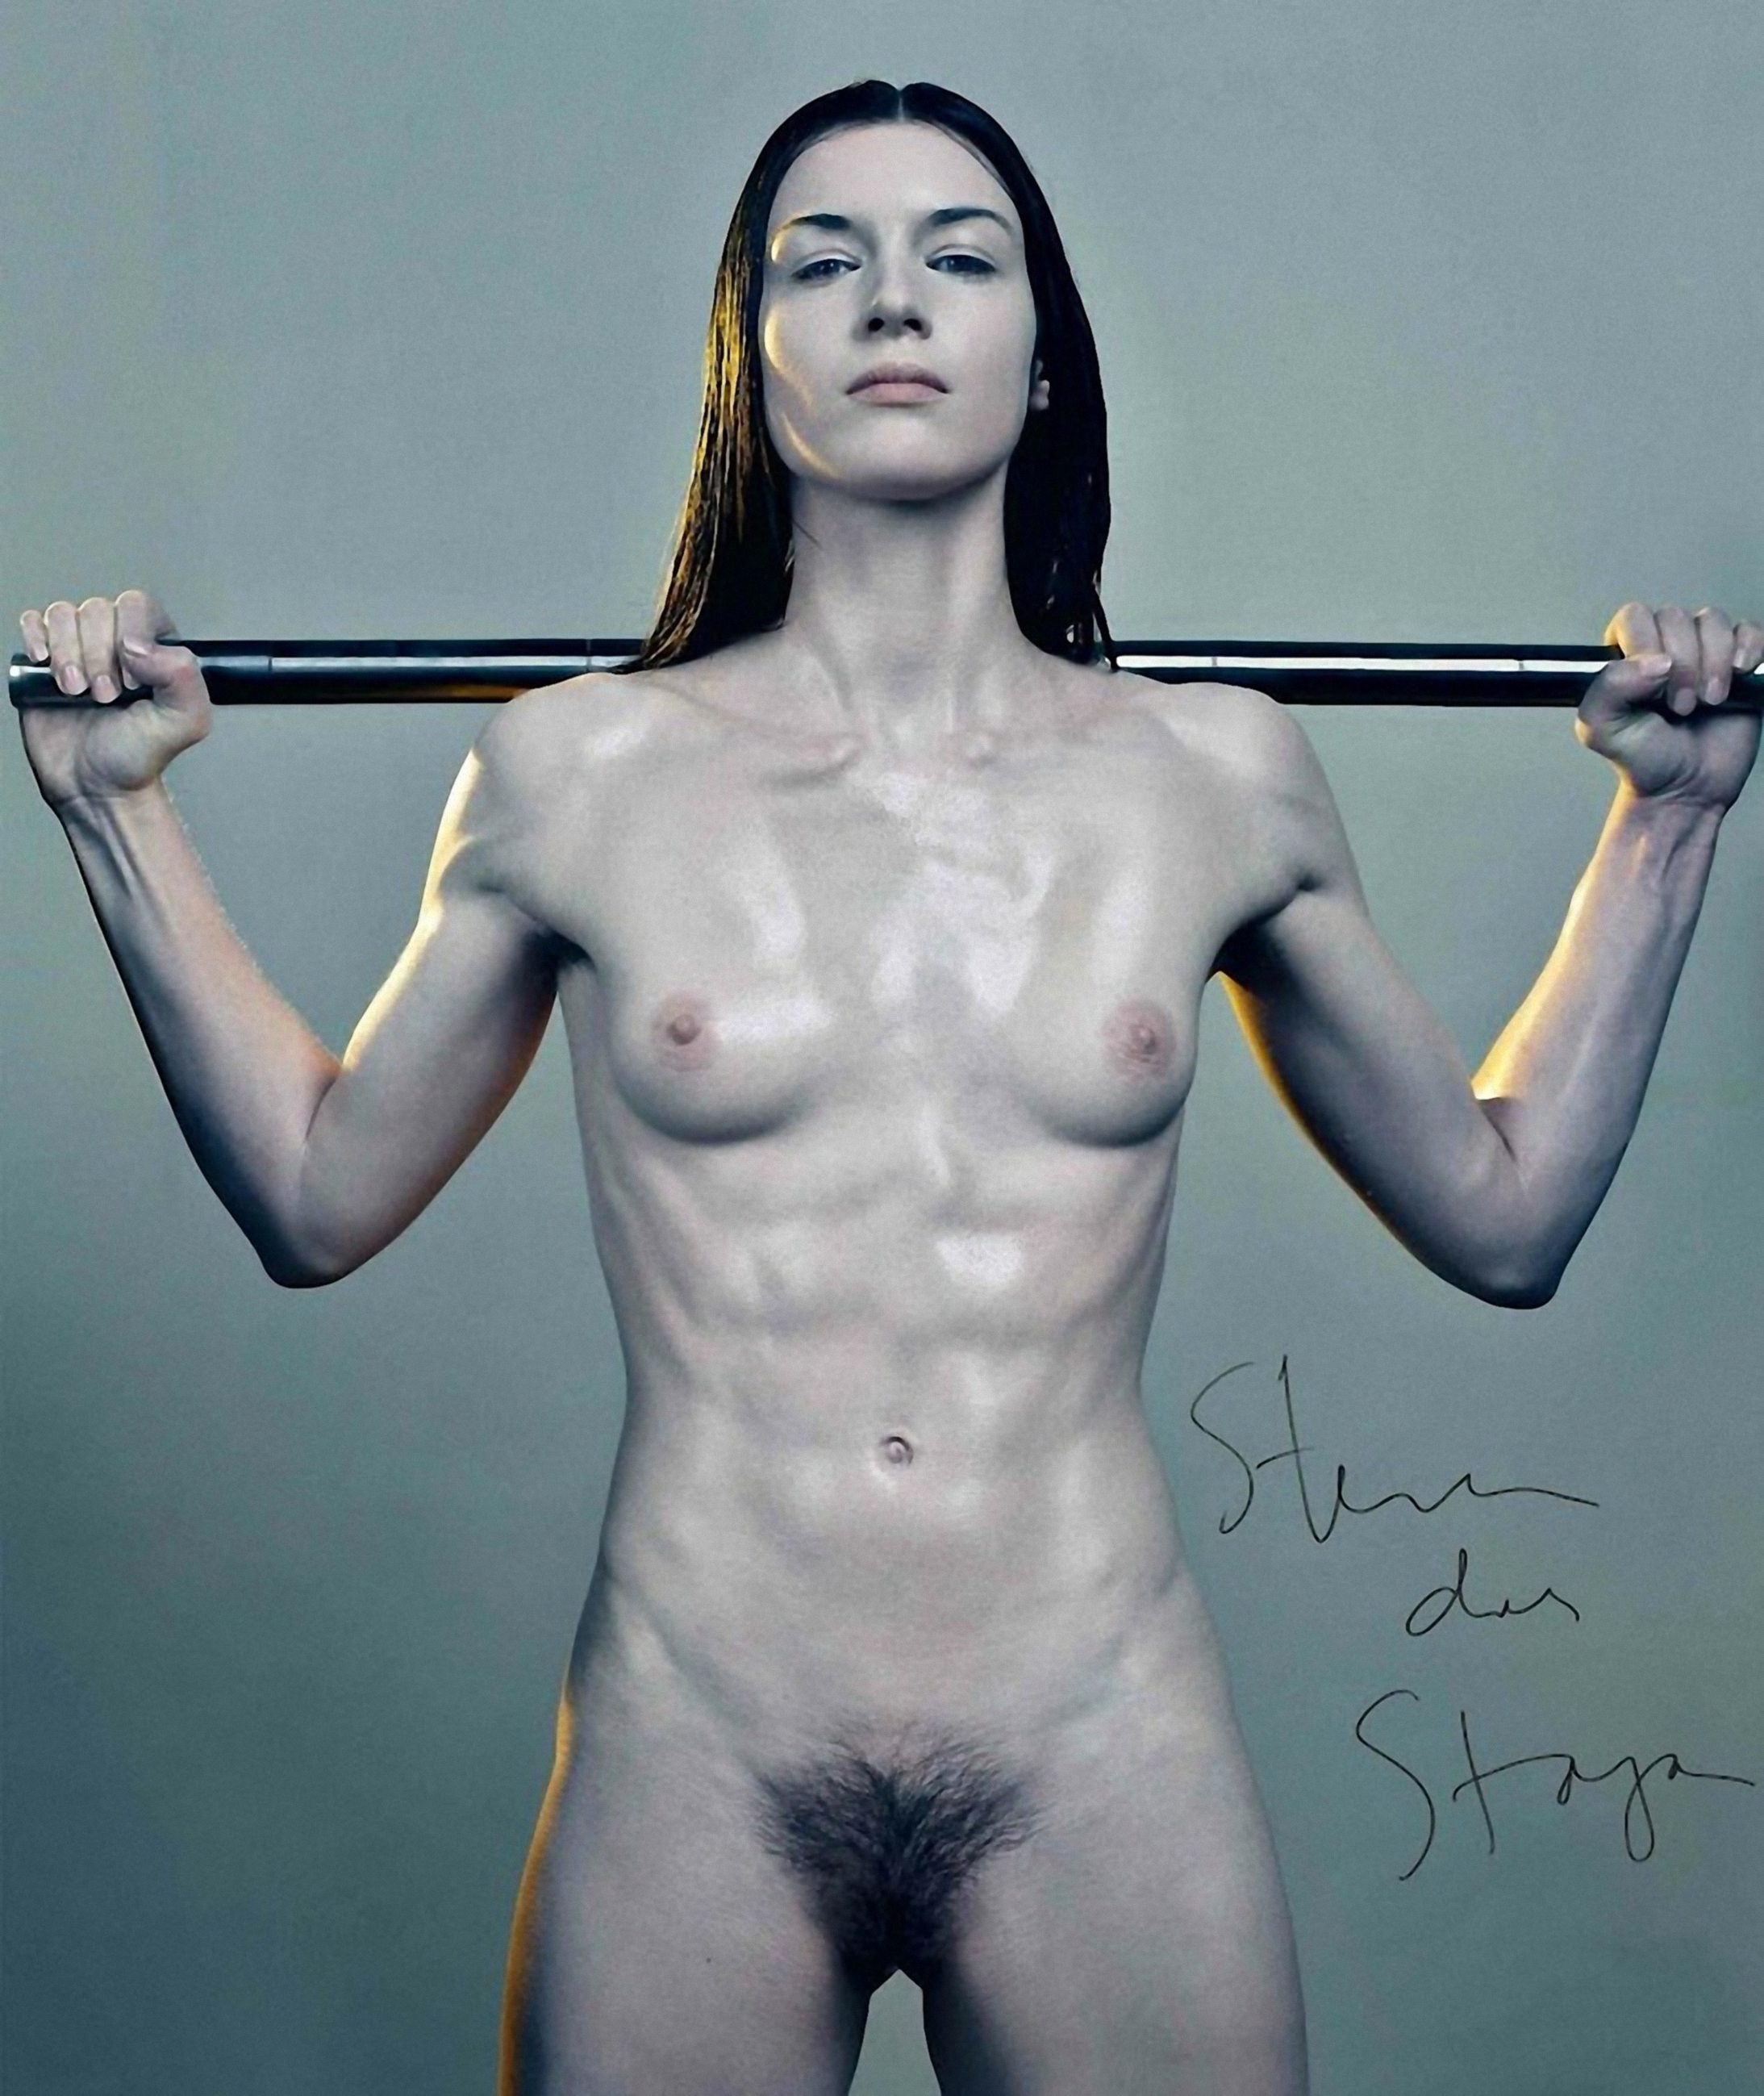 Picture tagged with: Skinny, Brunette, Stoya, Fit, Flat ches